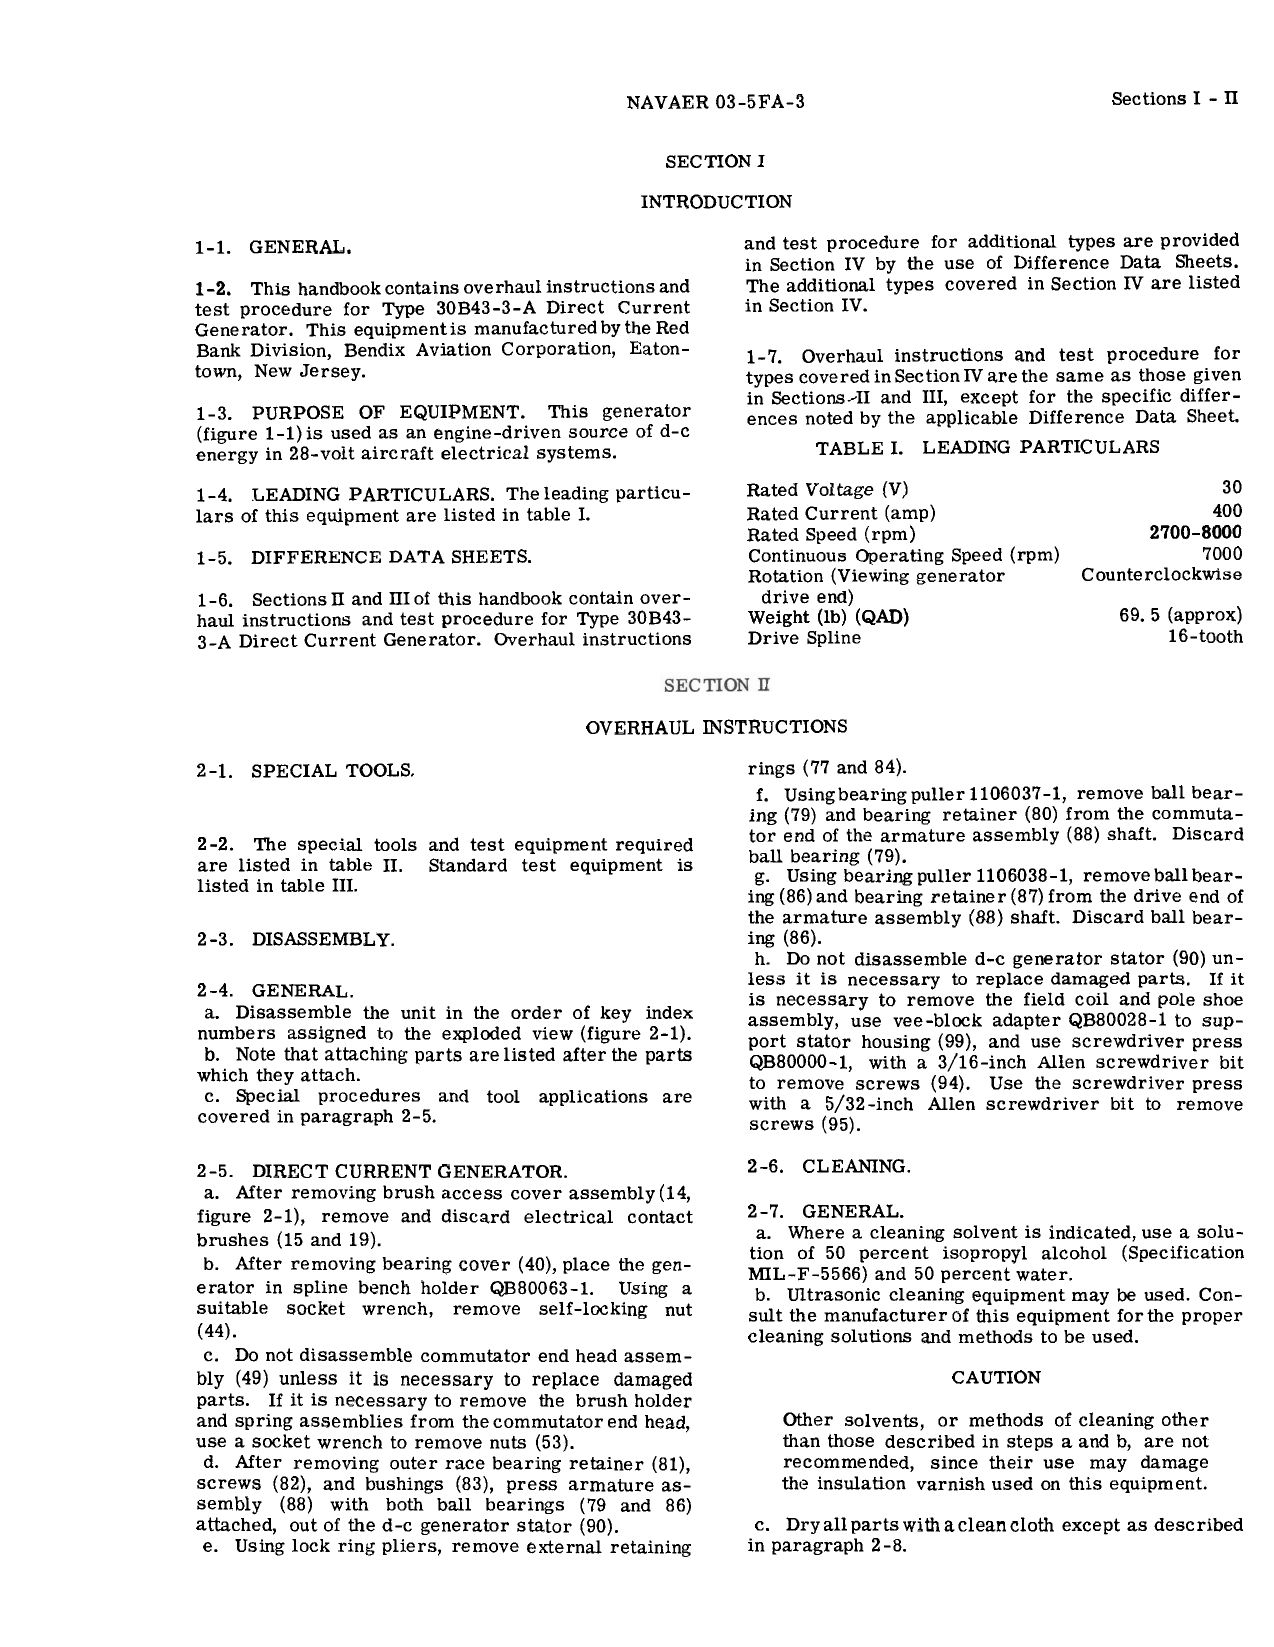 Sample page 5 from AirCorps Library document: Overhaul Instructions for Direct Current Generator - Types 30B43-3-A, 30B43-7-A, 30B43-7-B, 30B43-17-A